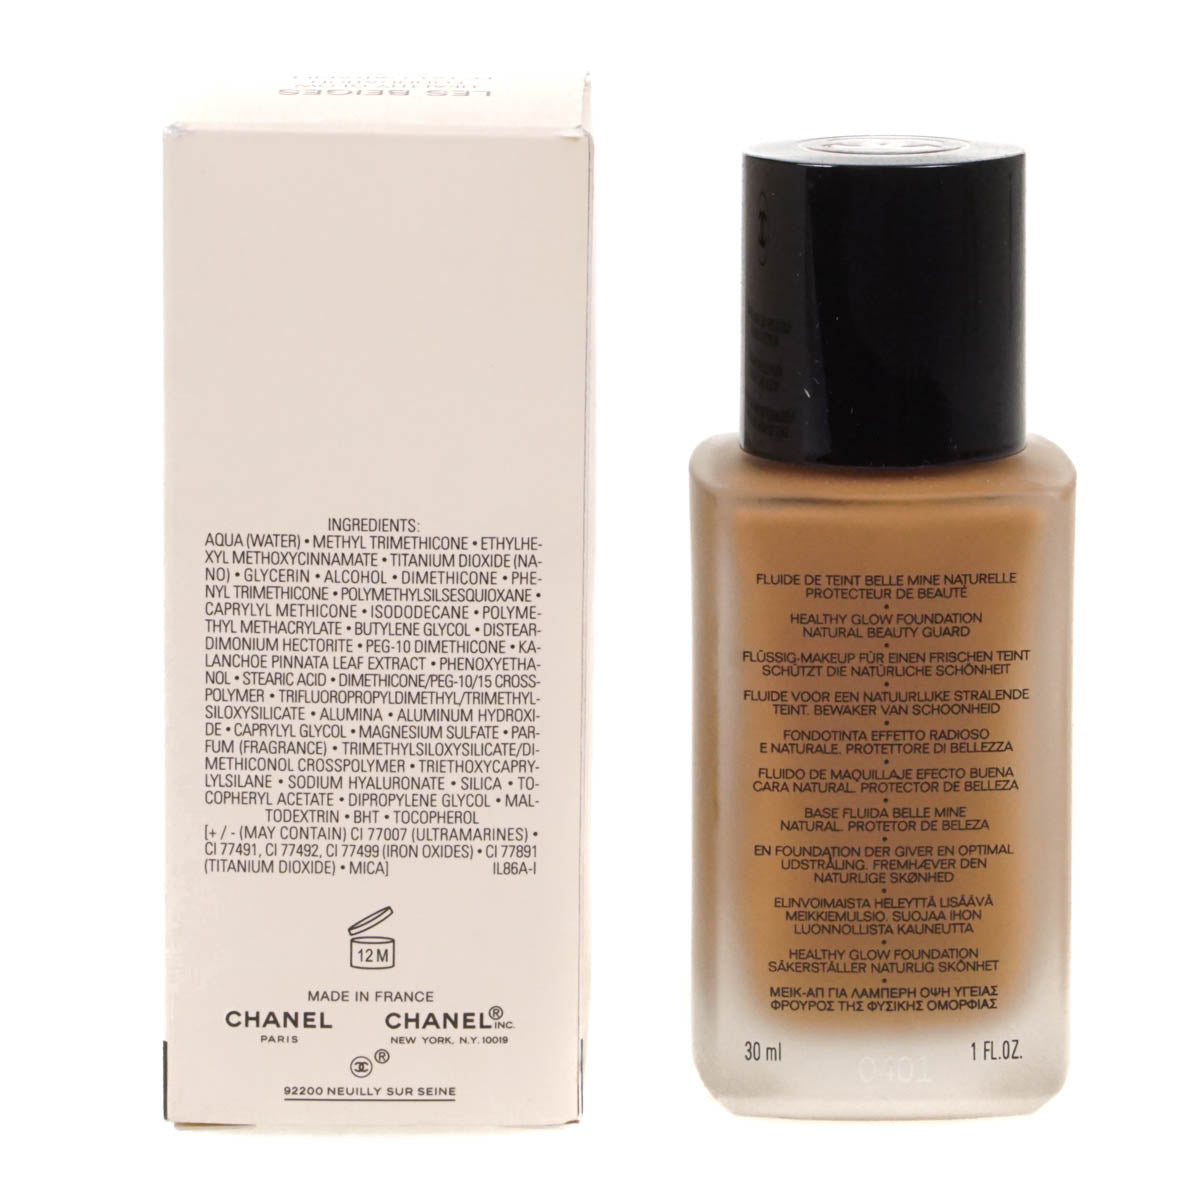 Chanel Les Beiges Healthy Glow Foundation No121 (Blemished Box)